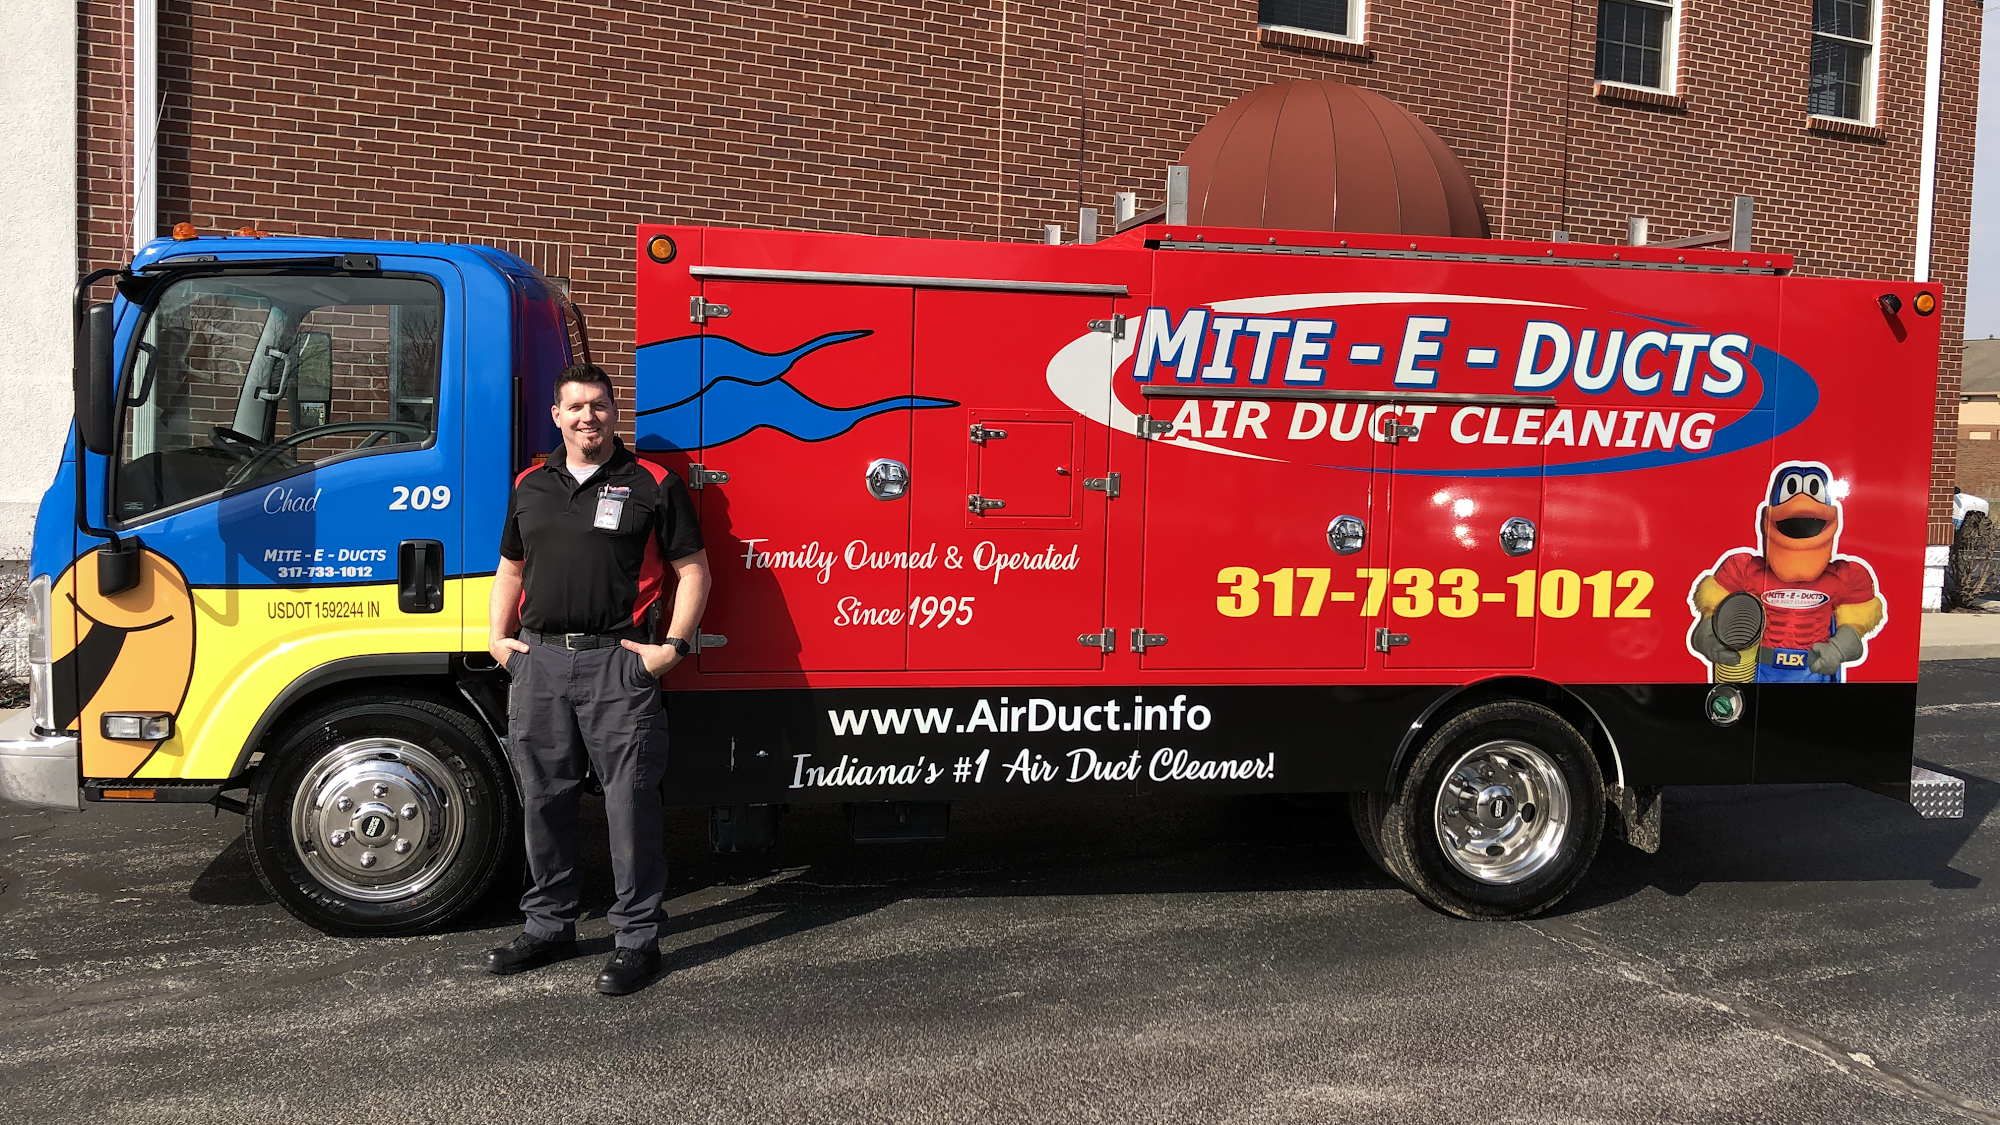 Mite-E-Ducts Air Duct Cleaning